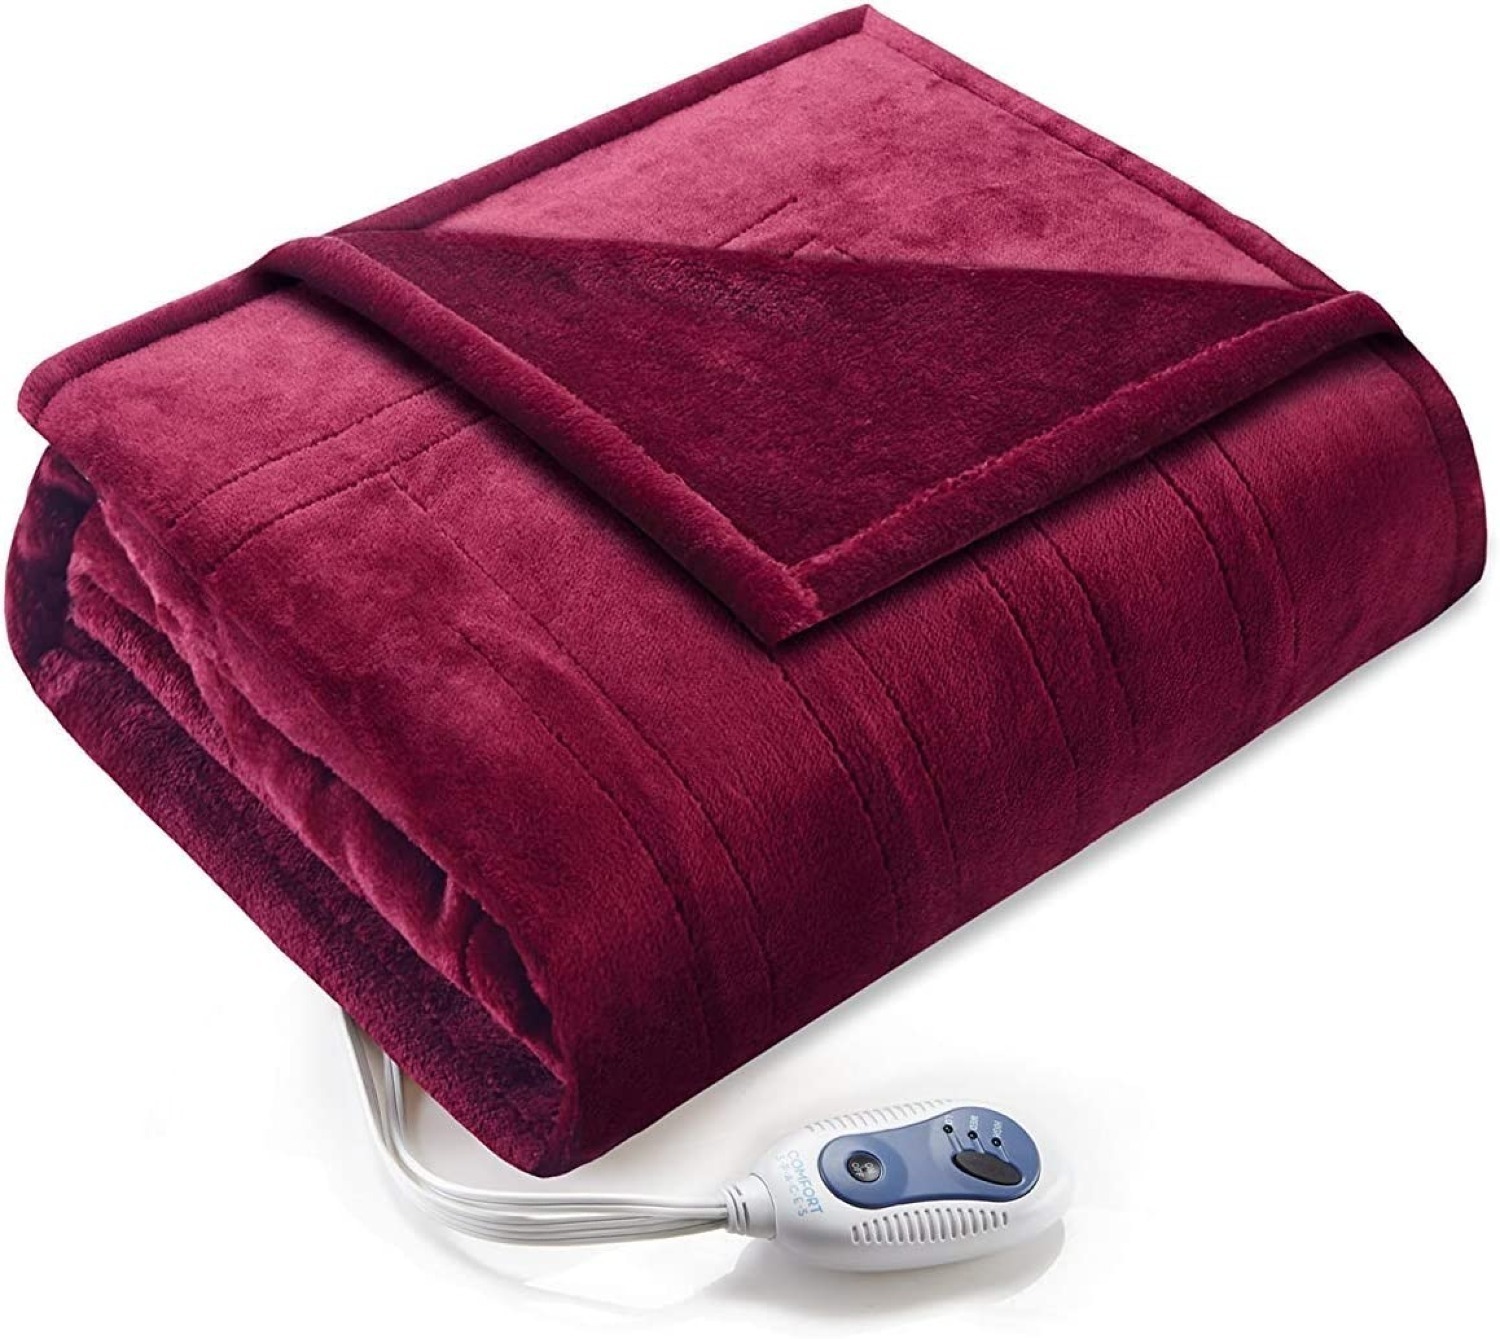 50"x64" Comfort Spaces Snuggle Electric Heated Wrap Poncho $30.36 + Free Shipping